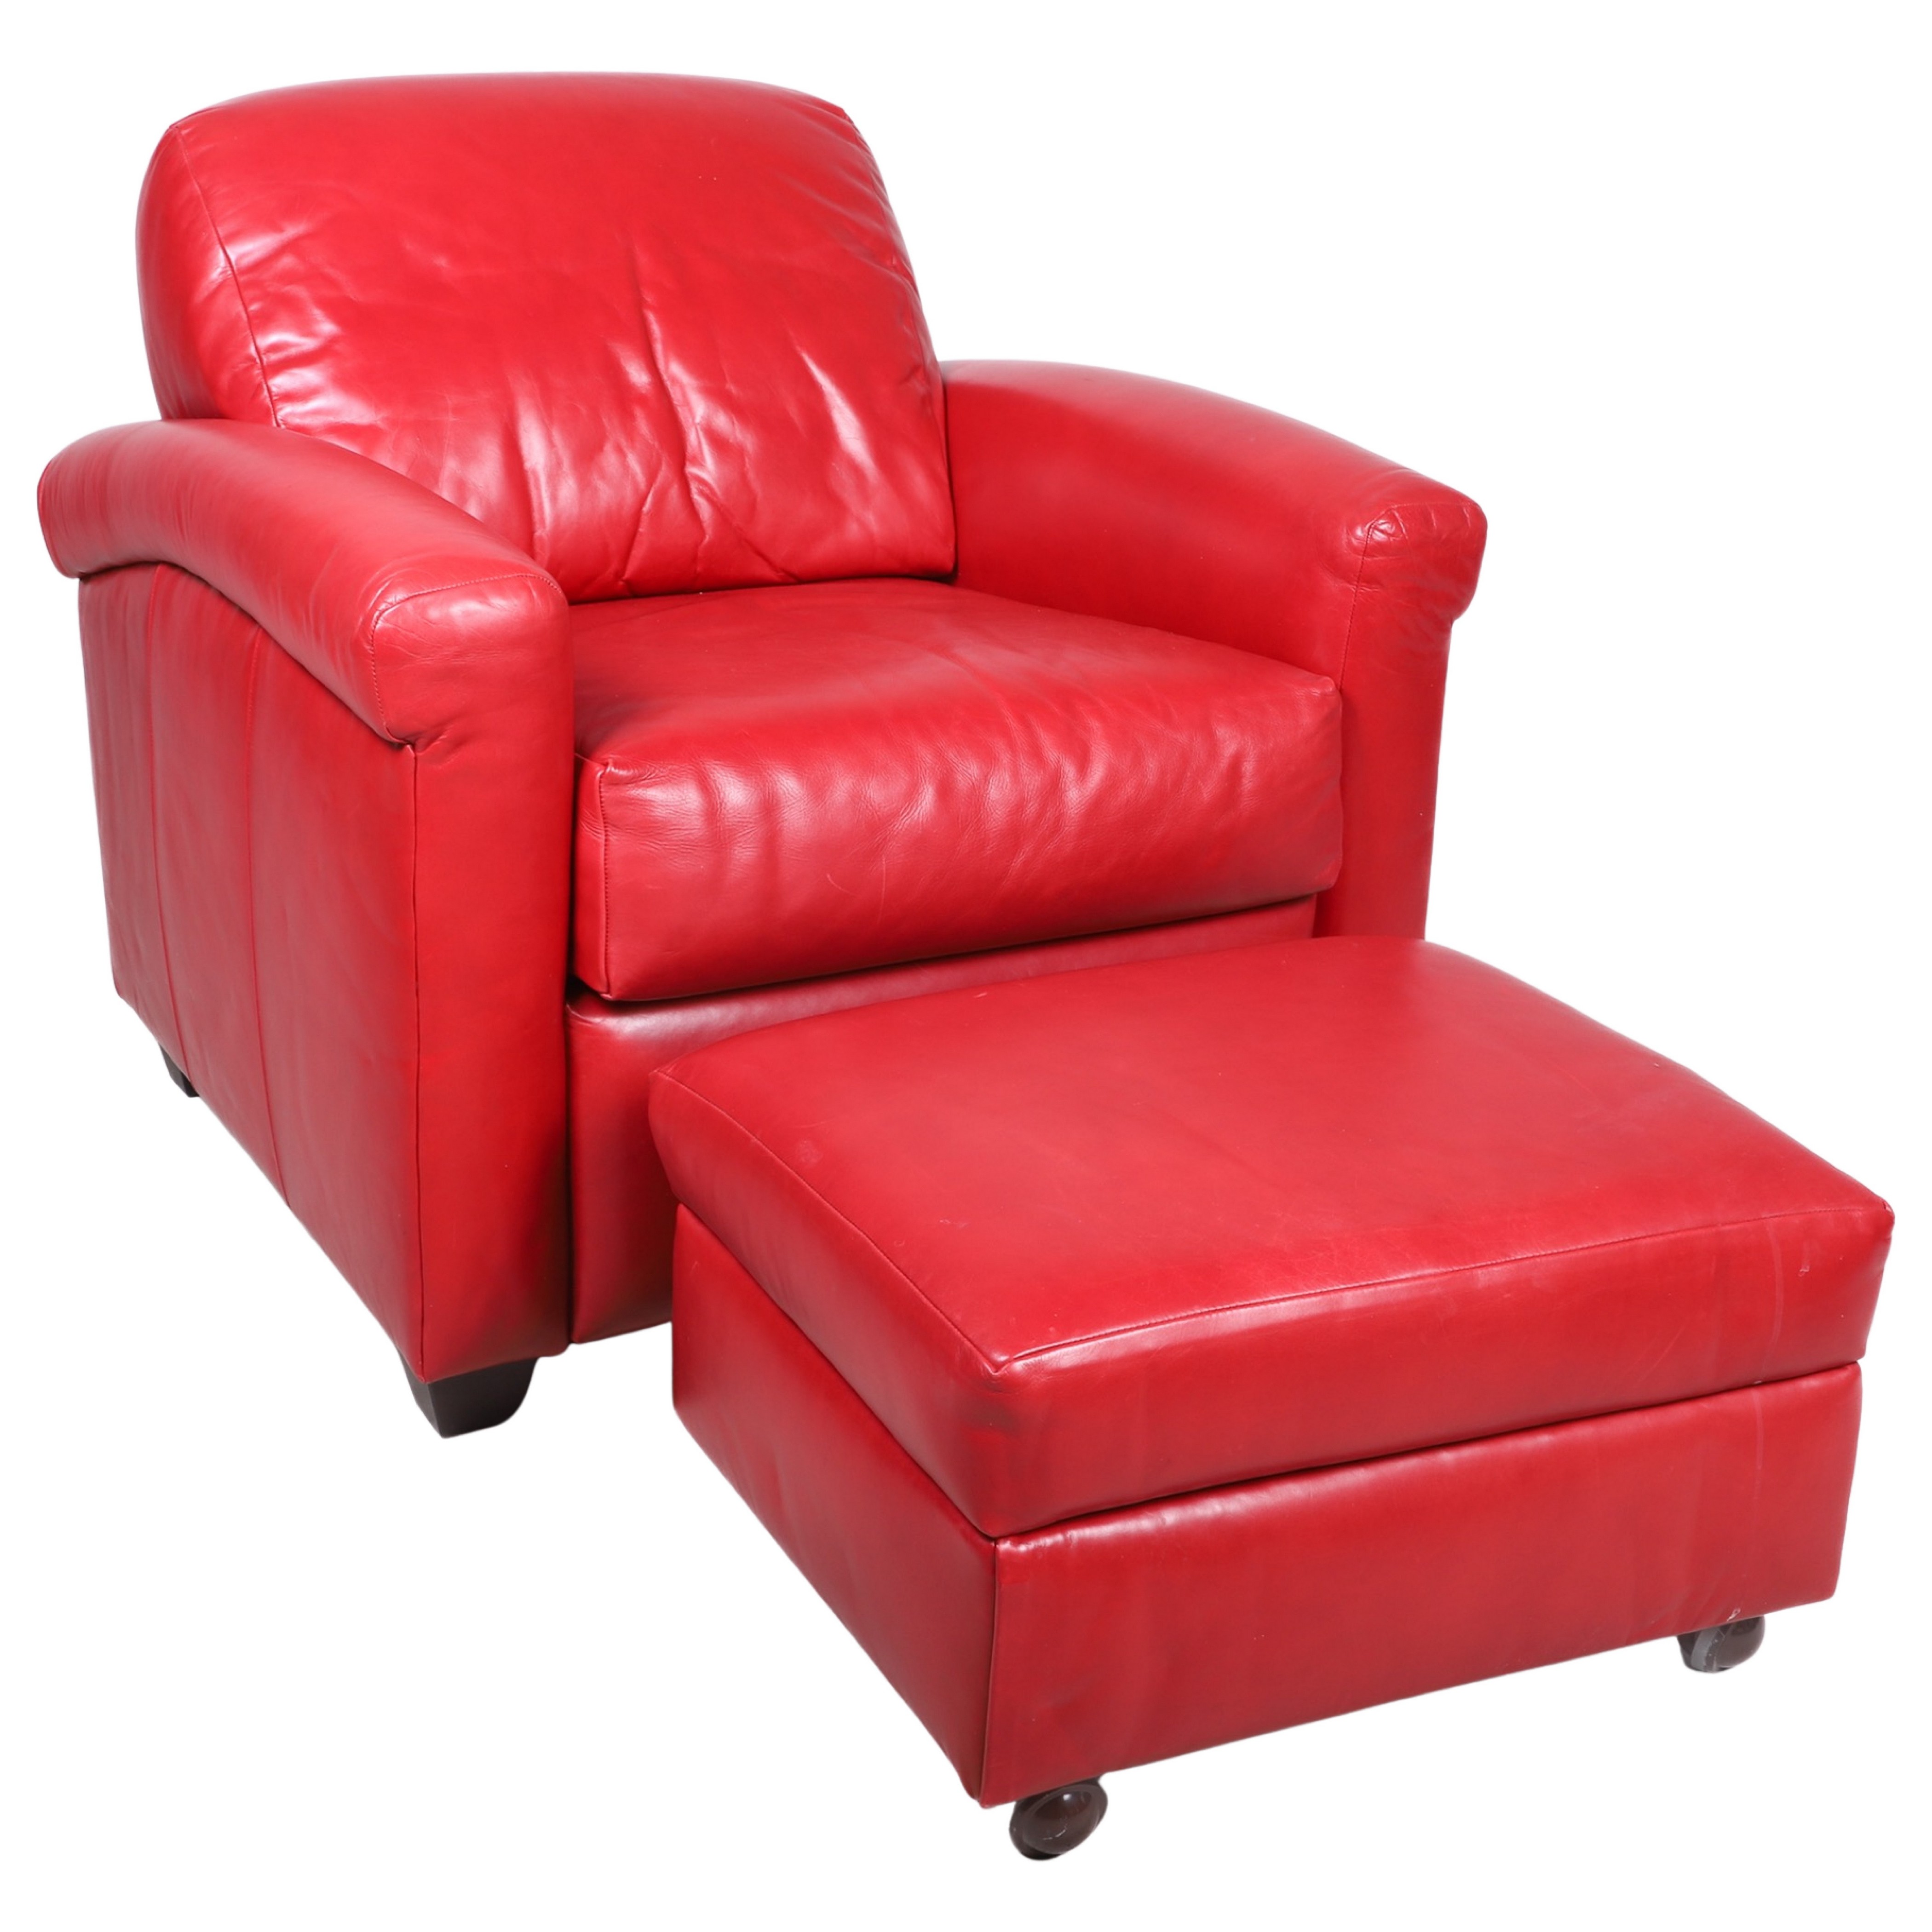 Contemporary leather lounge chair 30fd8a